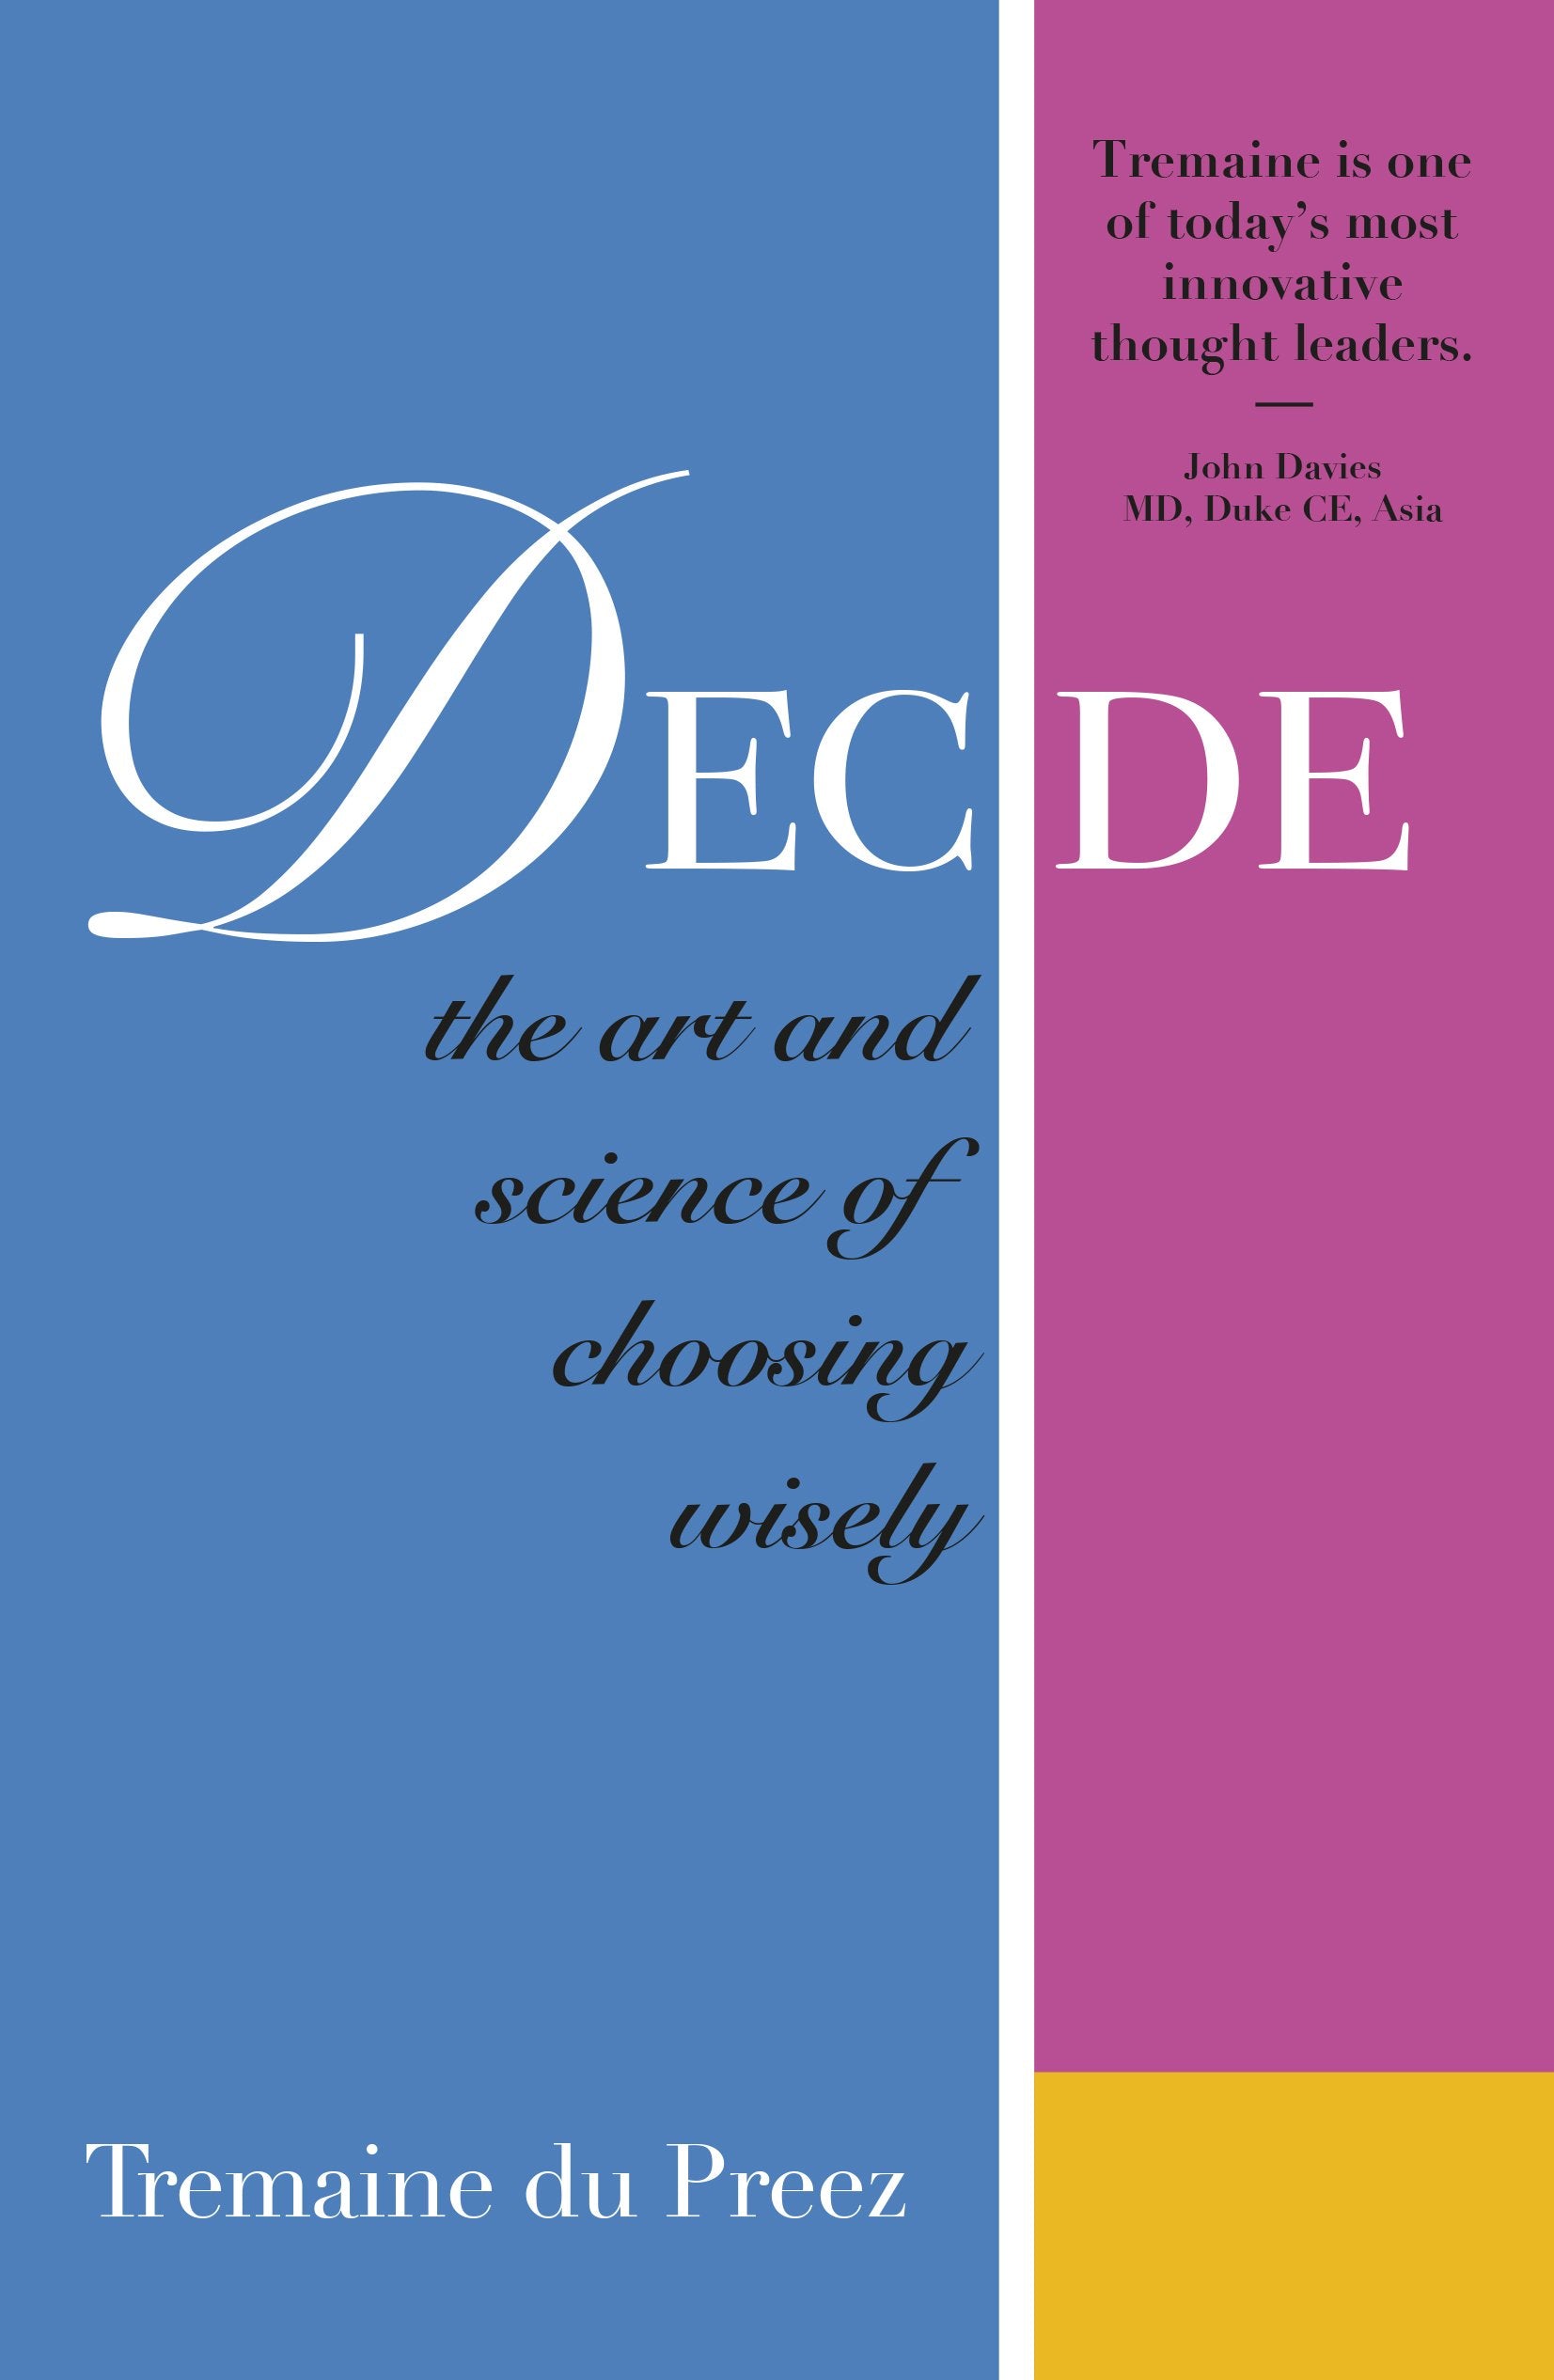 Decide: The art and science of choosing wisely